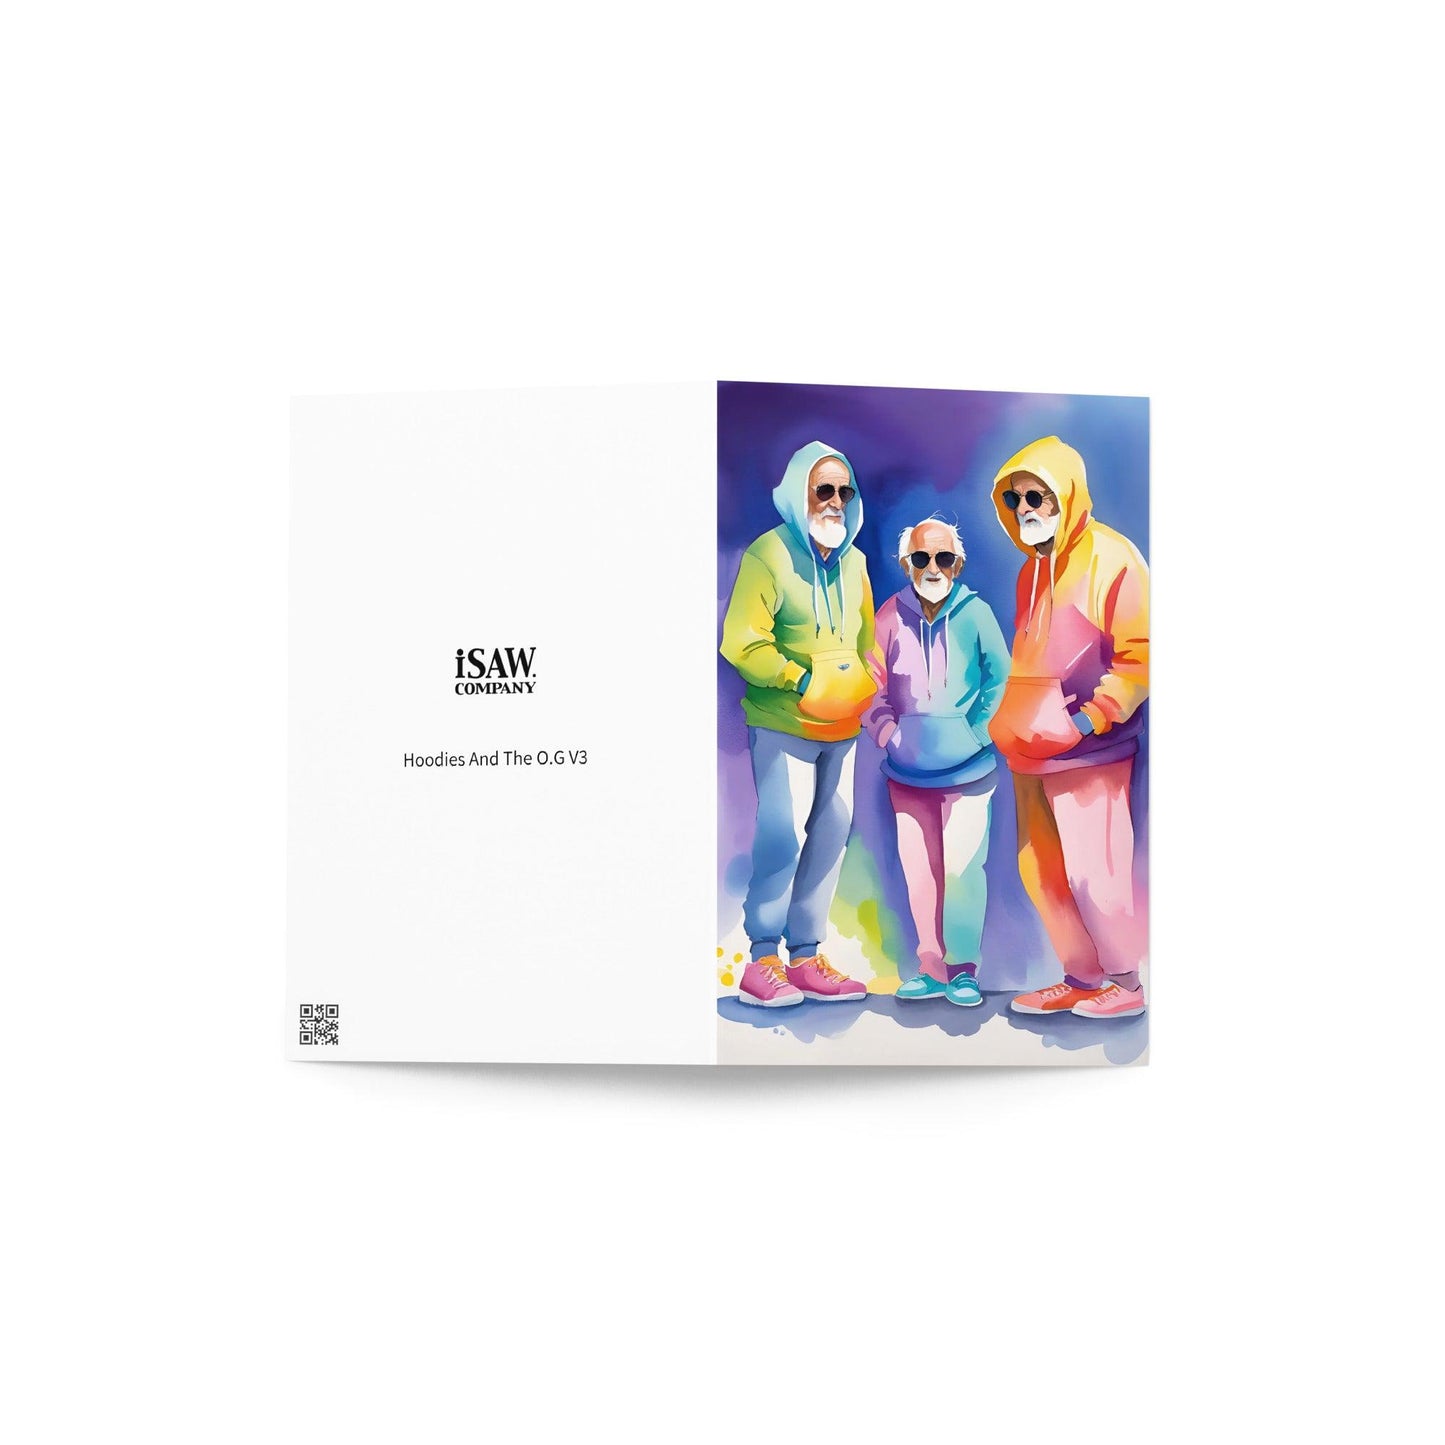 Hoodies And The O.G V3 - Note Card - iSAW Company